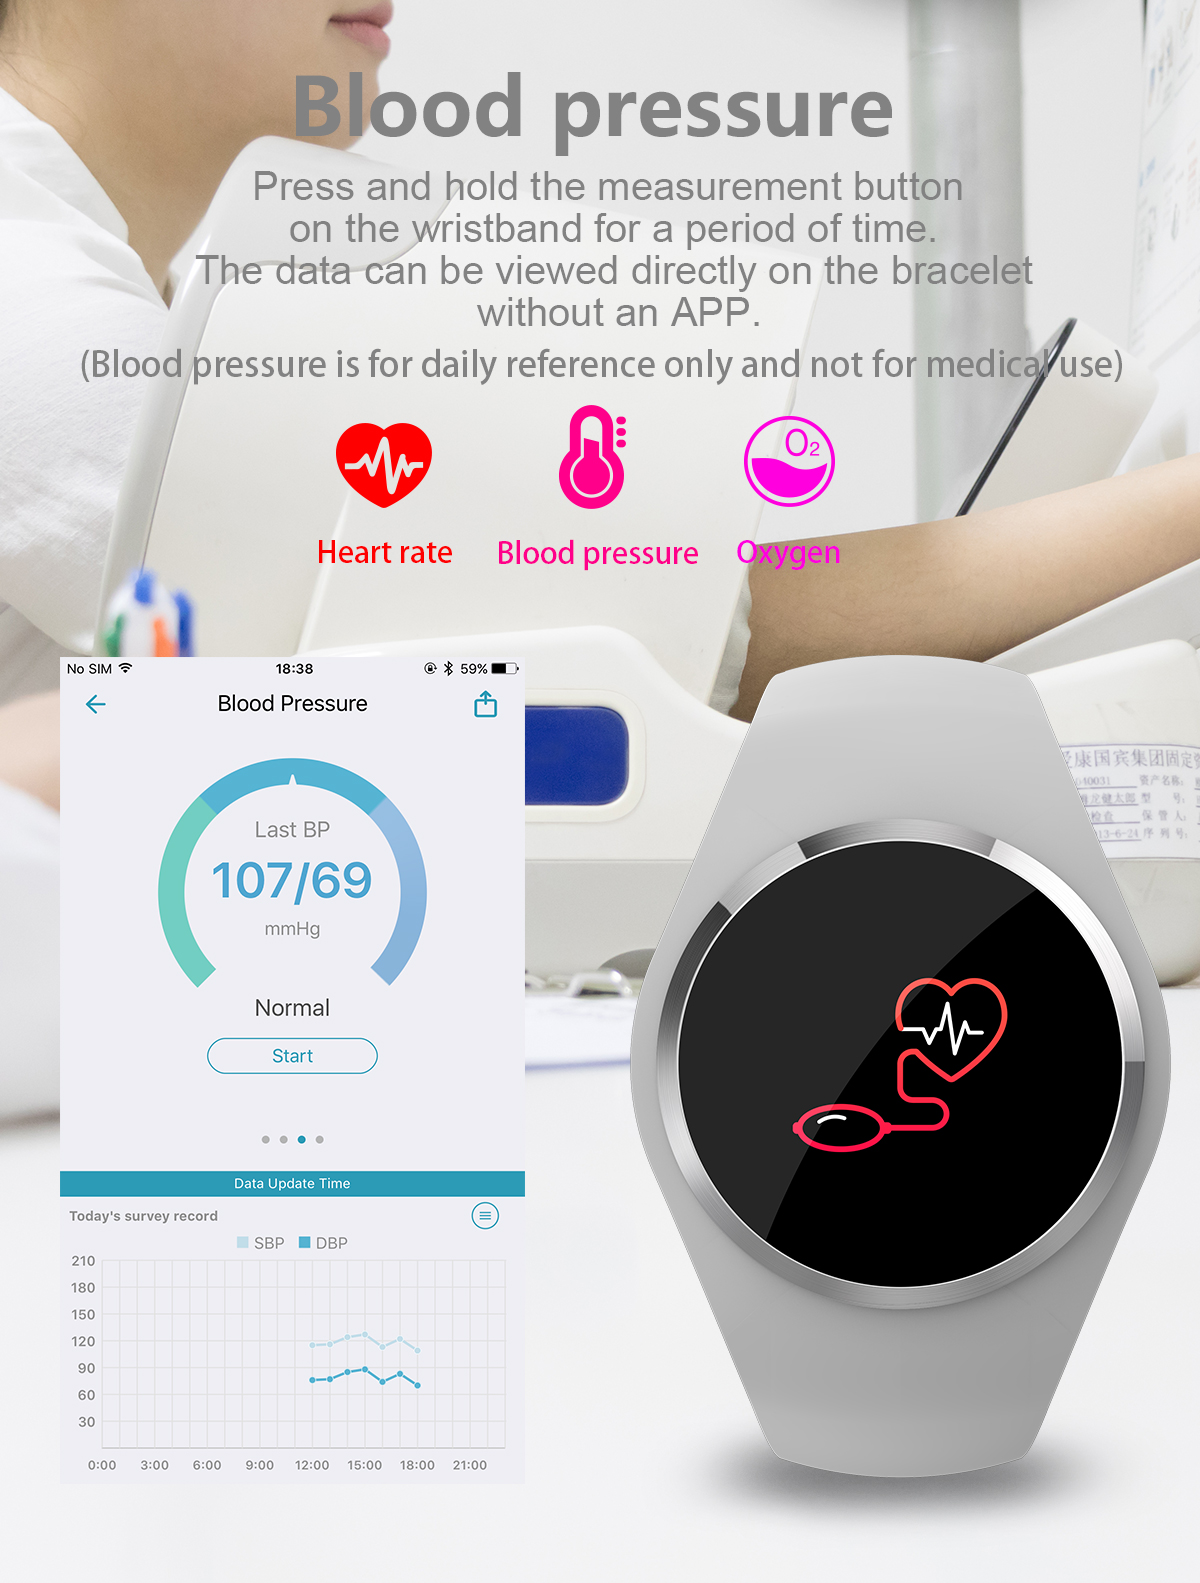 Newwear Q1 1.0inch Blood Pressure Heart Rate Monitor Long Standby Fitness Tracker Smart Wristband